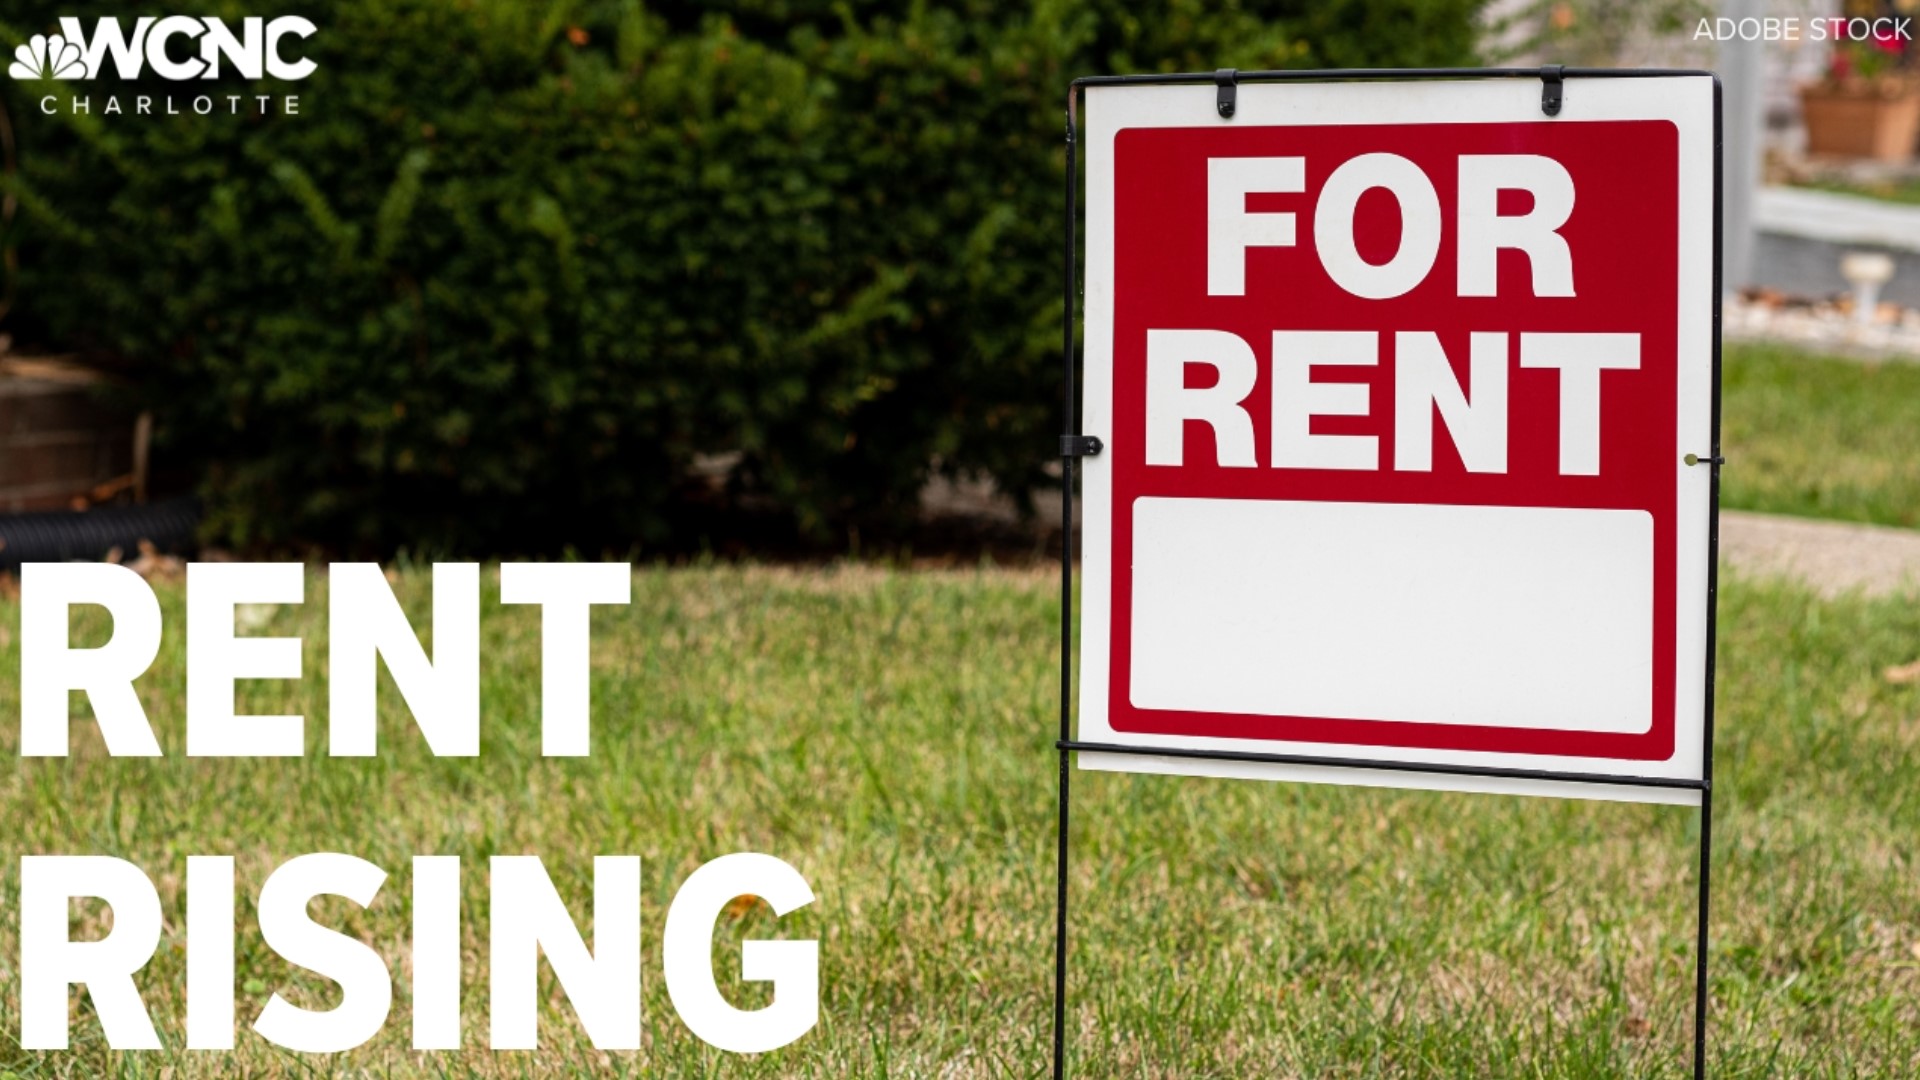 Rental prices have gone up in Charlotte, increasing more than 20% over the last three years, according to an annual report from Rent.